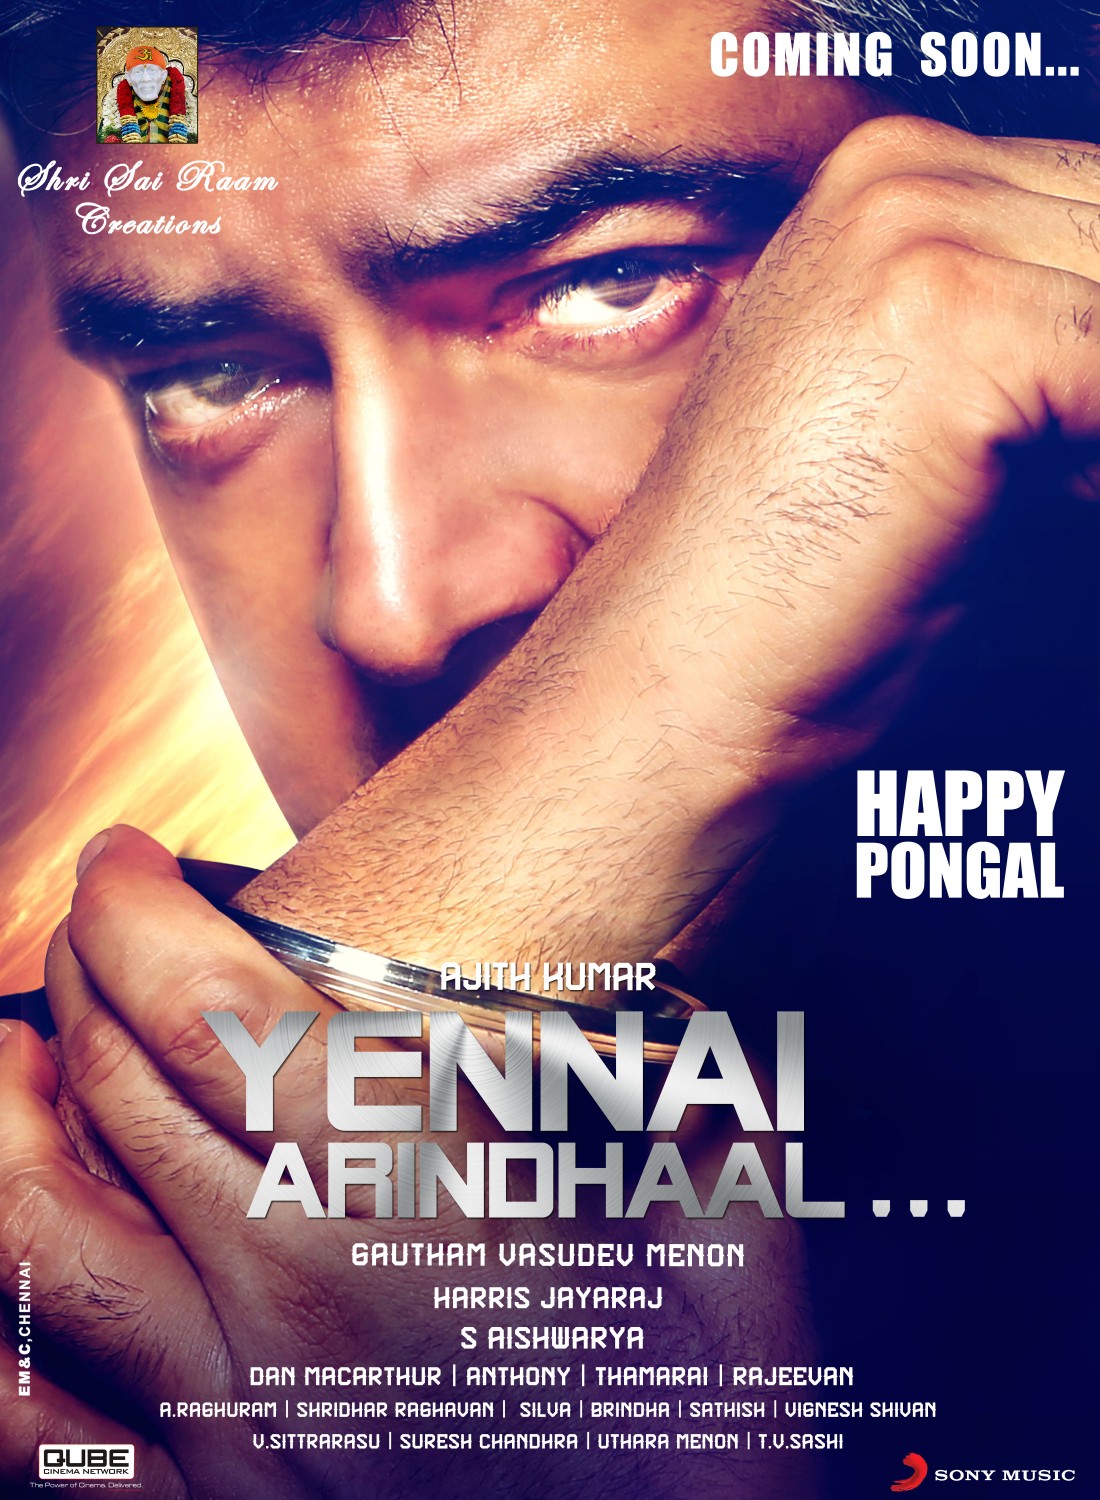 Extra Large Movie Poster Image for Yennai Arindhaal... (#8 of 11)